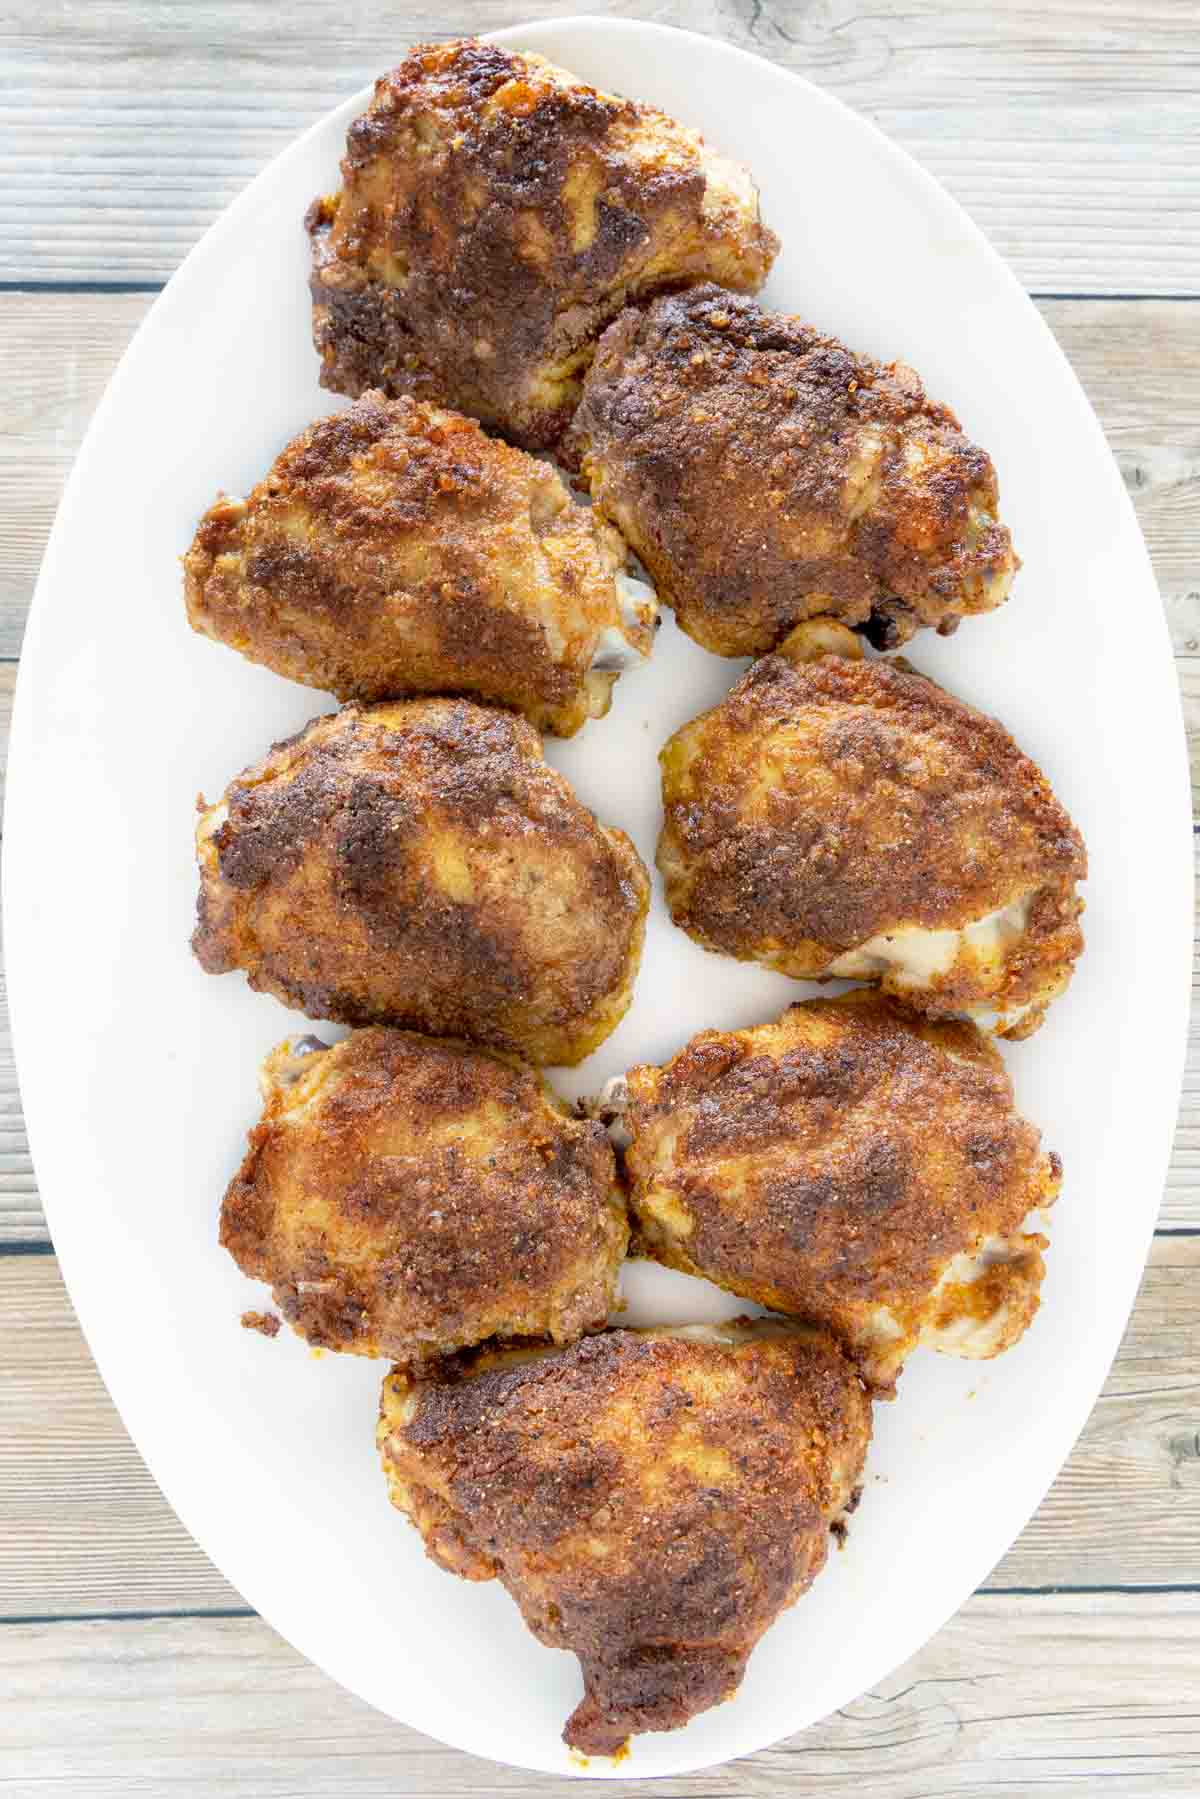 Baked chicken thighs on a white platter.